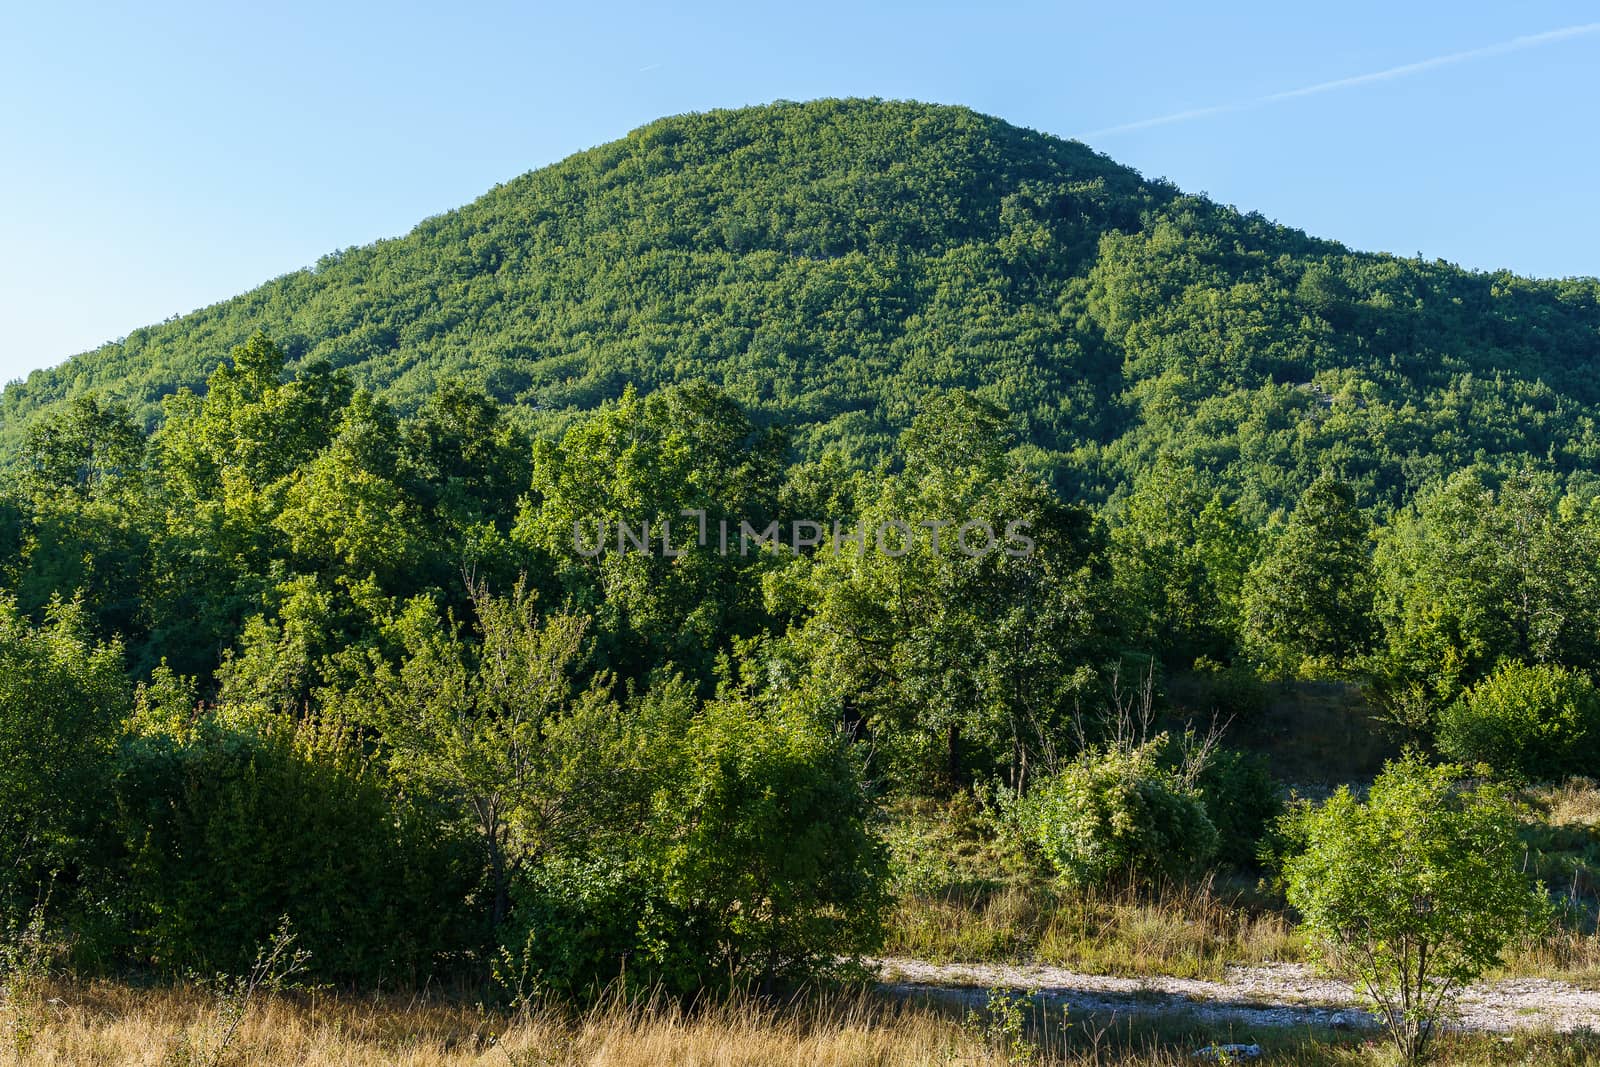 peak and slopes of mountains covered with vegetation against a blue sky 